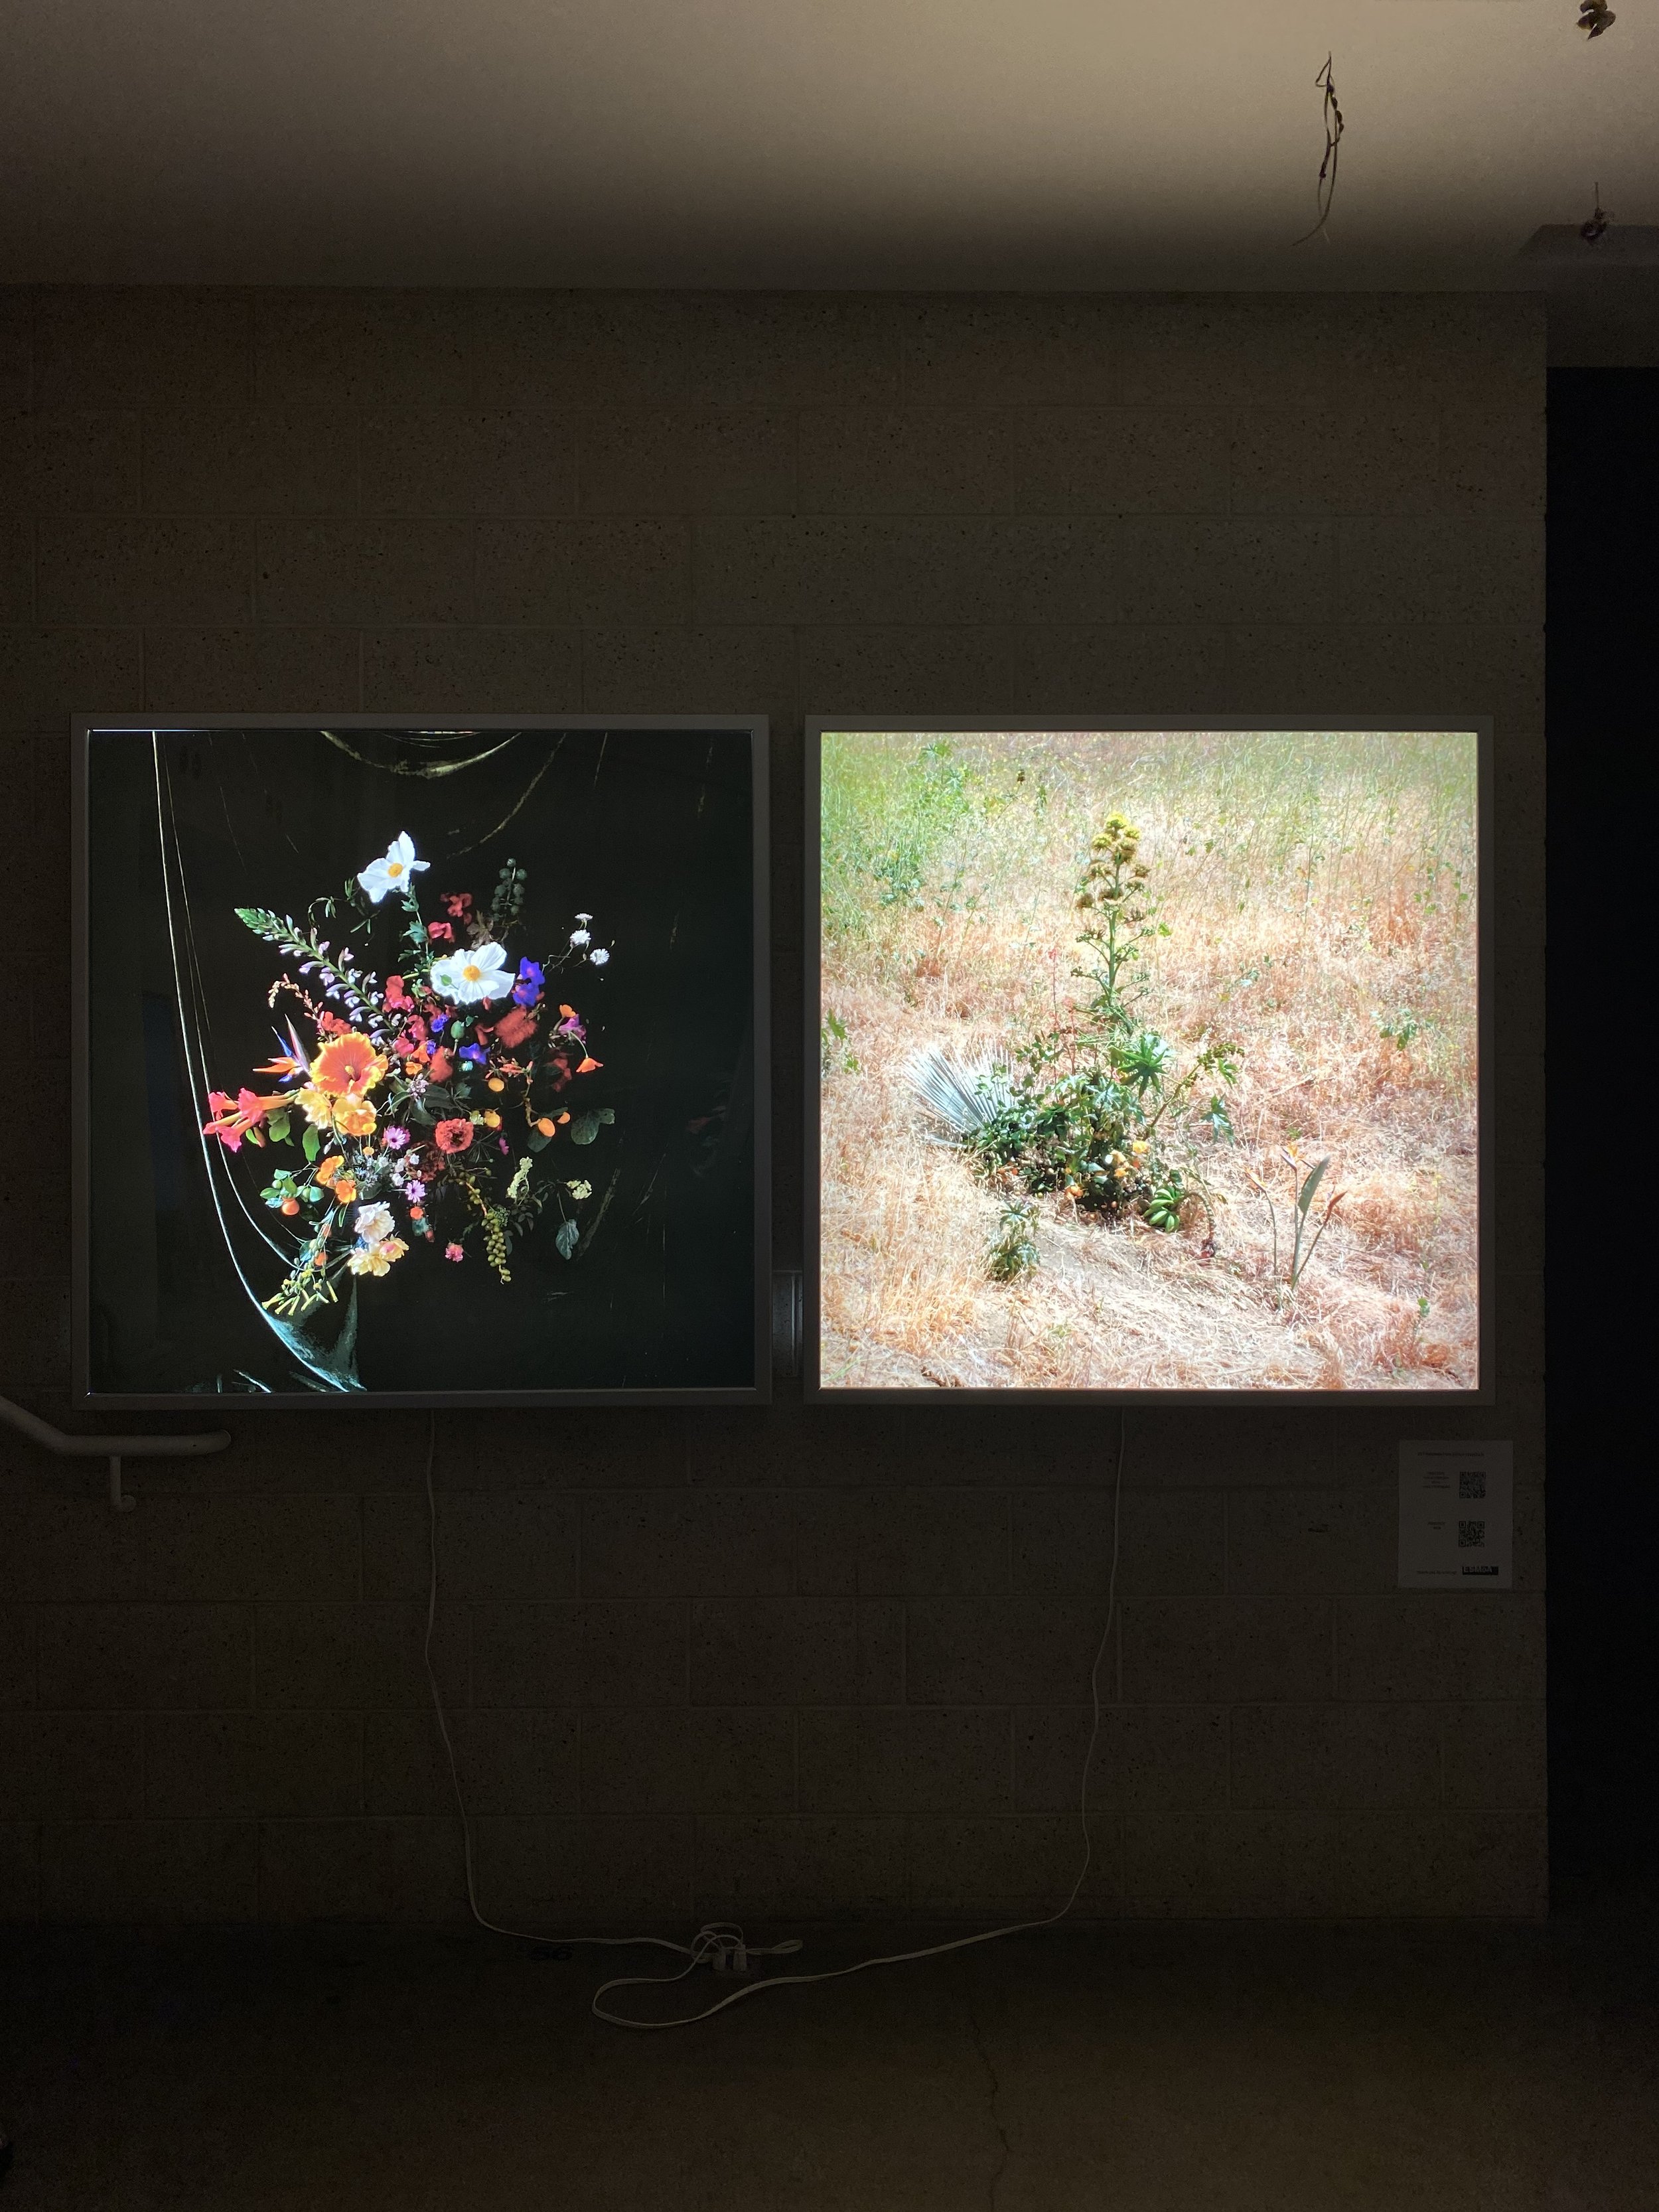  in the studio / on the hill  exhibited at ESMOA as part of   we are all living in the garden   installation created as ESMOA LAB artist-in-residence, 2021   All flora depicted in these two photographs were foraged on the streets and hillsides of Los